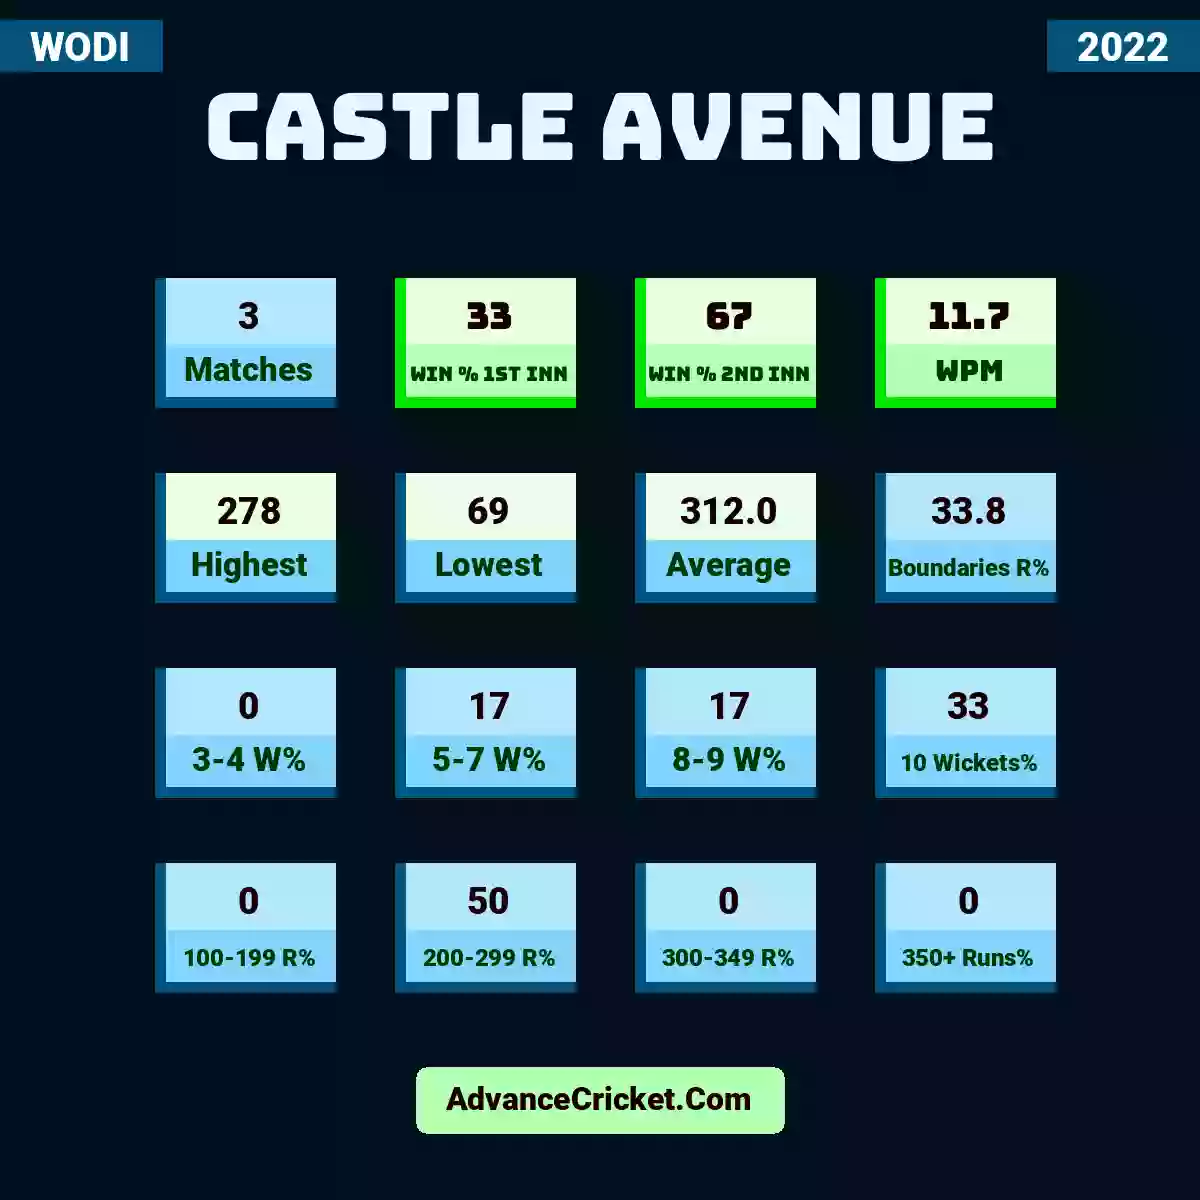 Image showing Castle Avenue with Matches: 3, Win % 1st Inn: 33, Win % 2nd Inn: 67, WPM: 11.7, Highest: 278, Lowest: 69, Average: 312.0, Boundaries R%: 33.8, 3-4 W%: 0, 5-7 W%: 17, 8-9 W%: 17, 10 Wickets%: 33, 100-199 R%: 0, 200-299 R%: 50, 300-349 R%: 0, 350+ Runs%: 0.